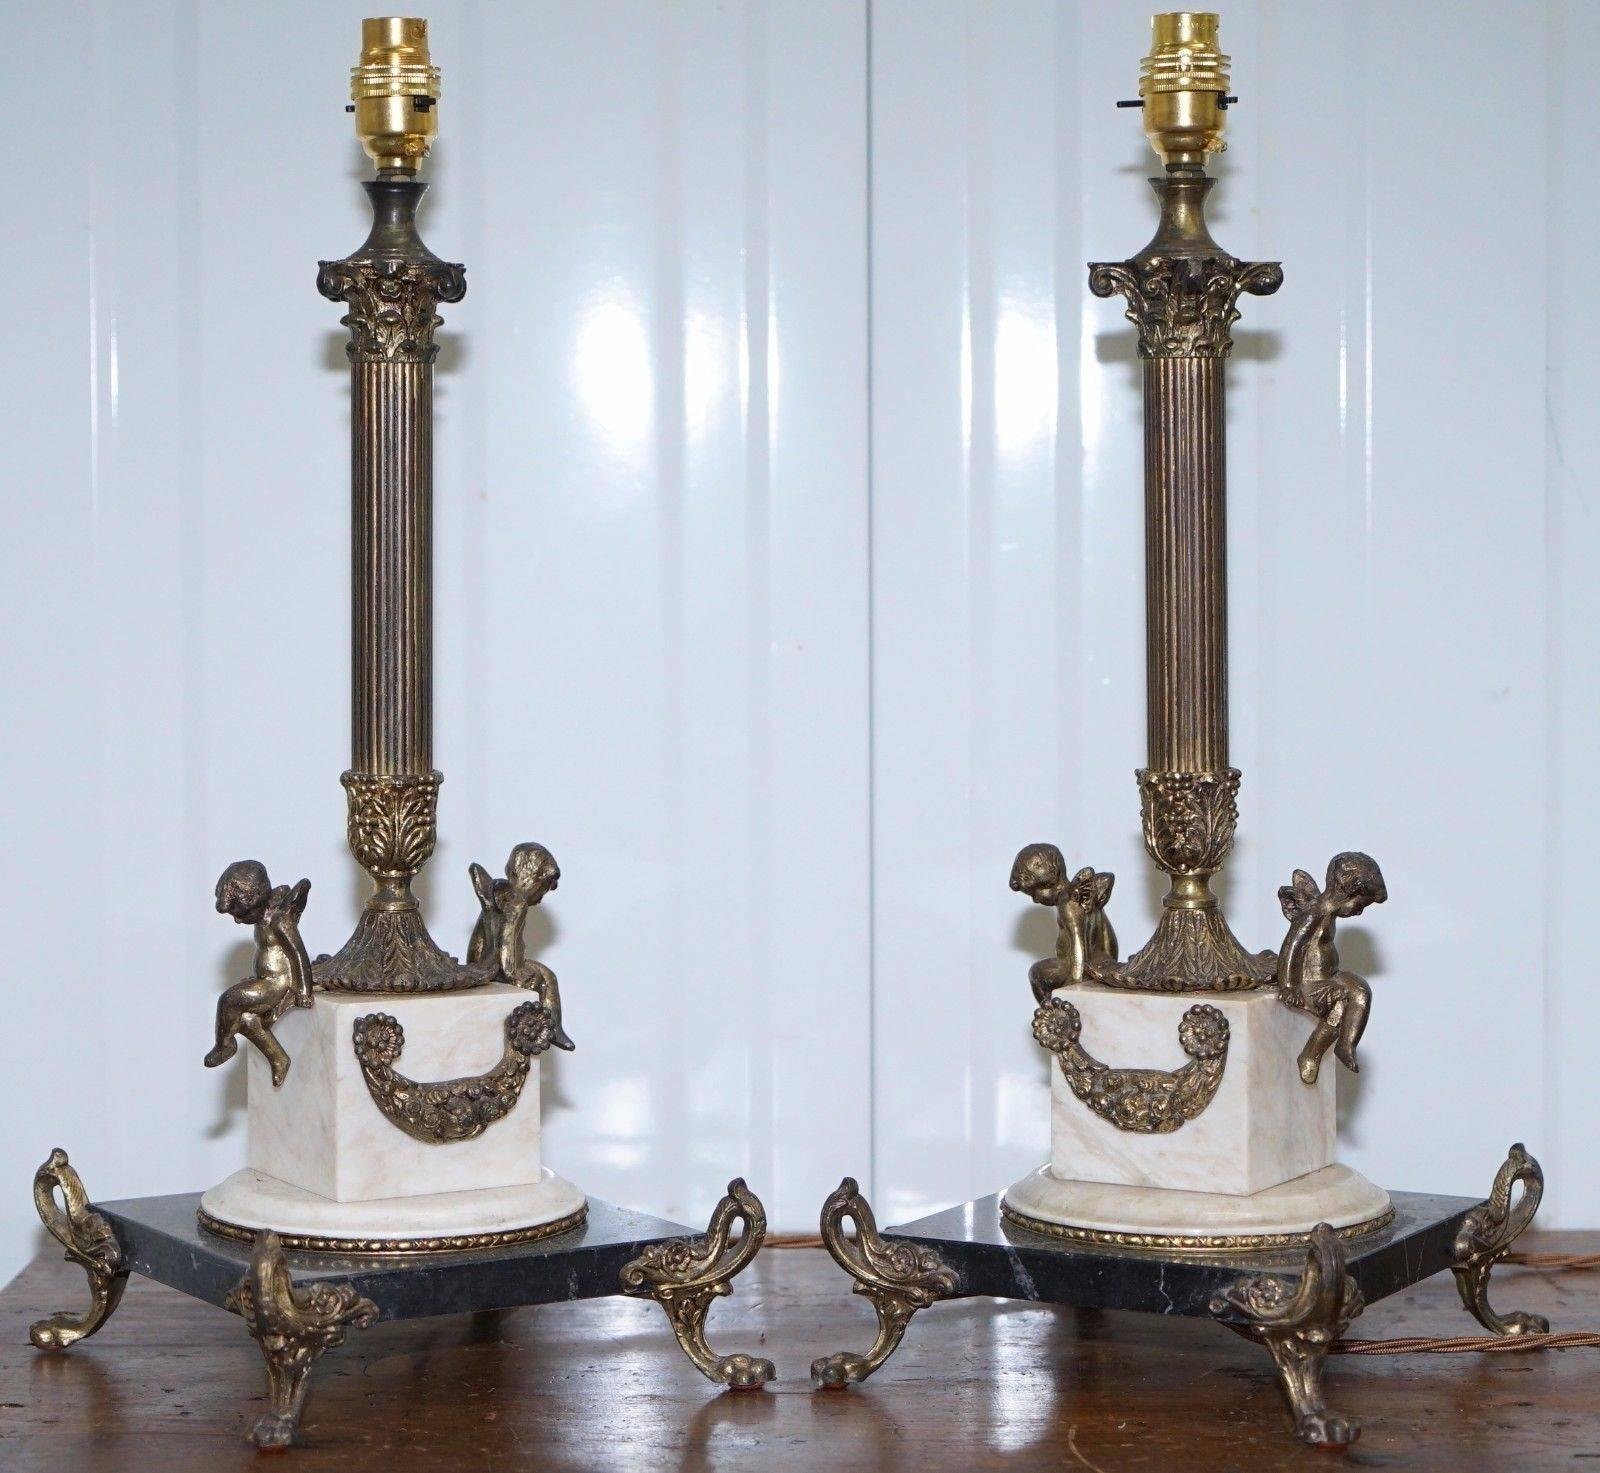 Wimbledon-Furniture is delighted to offer for sale this stunning pair of bronze Corinthian pillared lamps with cherubs and solid marble bases, fully rewired and ready to go

This pair is the finest of the bunch, as mentioned they have been fully